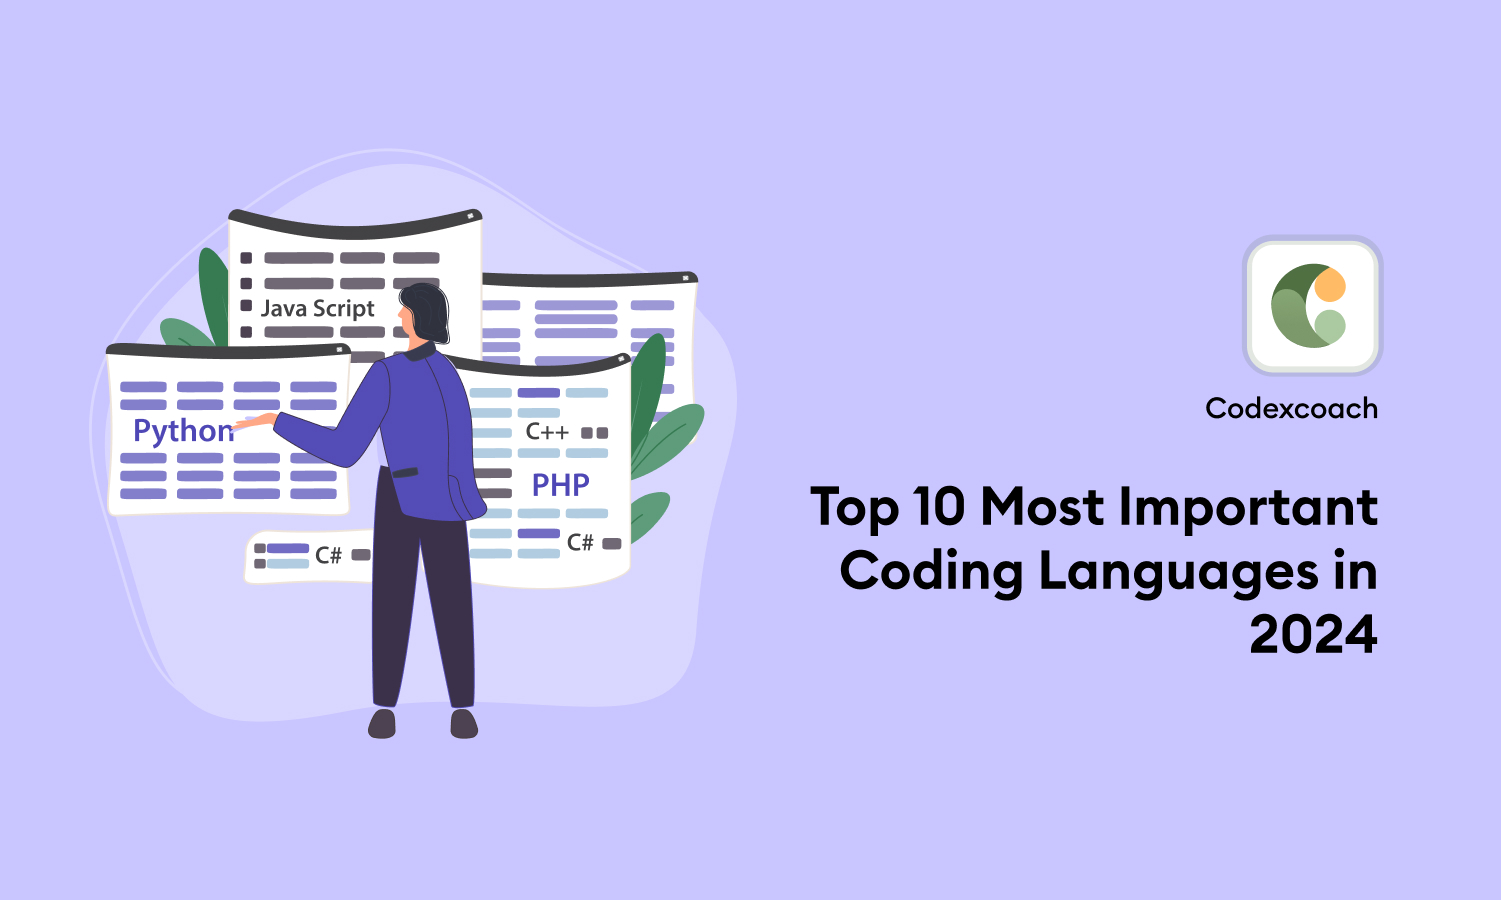 Top 10 Most Important Coding Languages in 2024